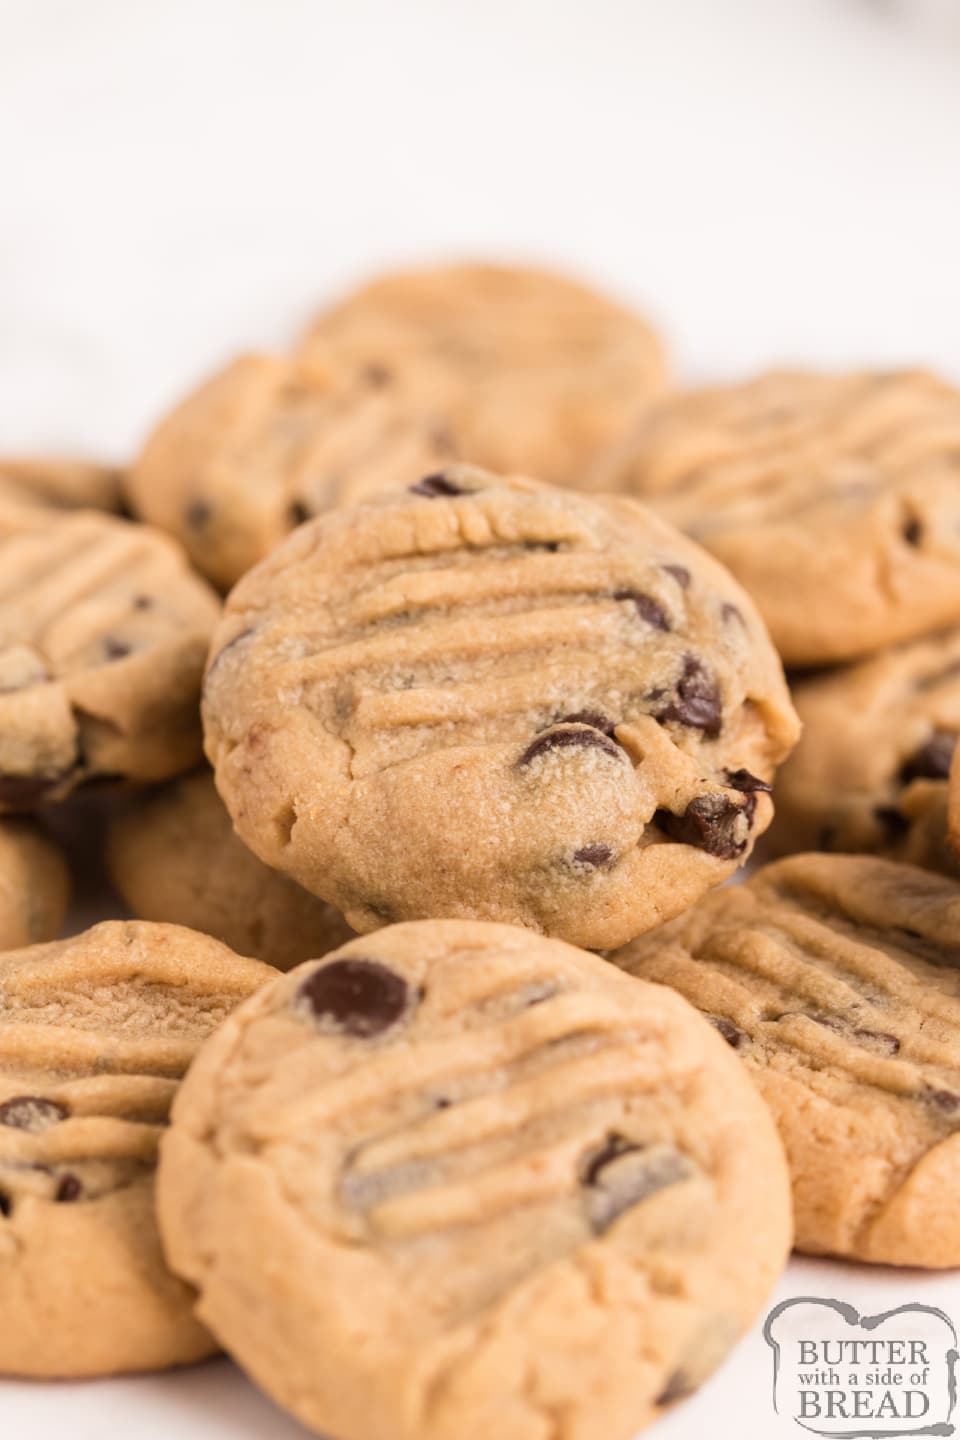 Peanut Butter Chocolate Chip Cookies are soft, chewy, and they turn out perfect every time! Start with an amazing peanut butter cookie recipe and add chocolate chips to take these cookies to the next level!